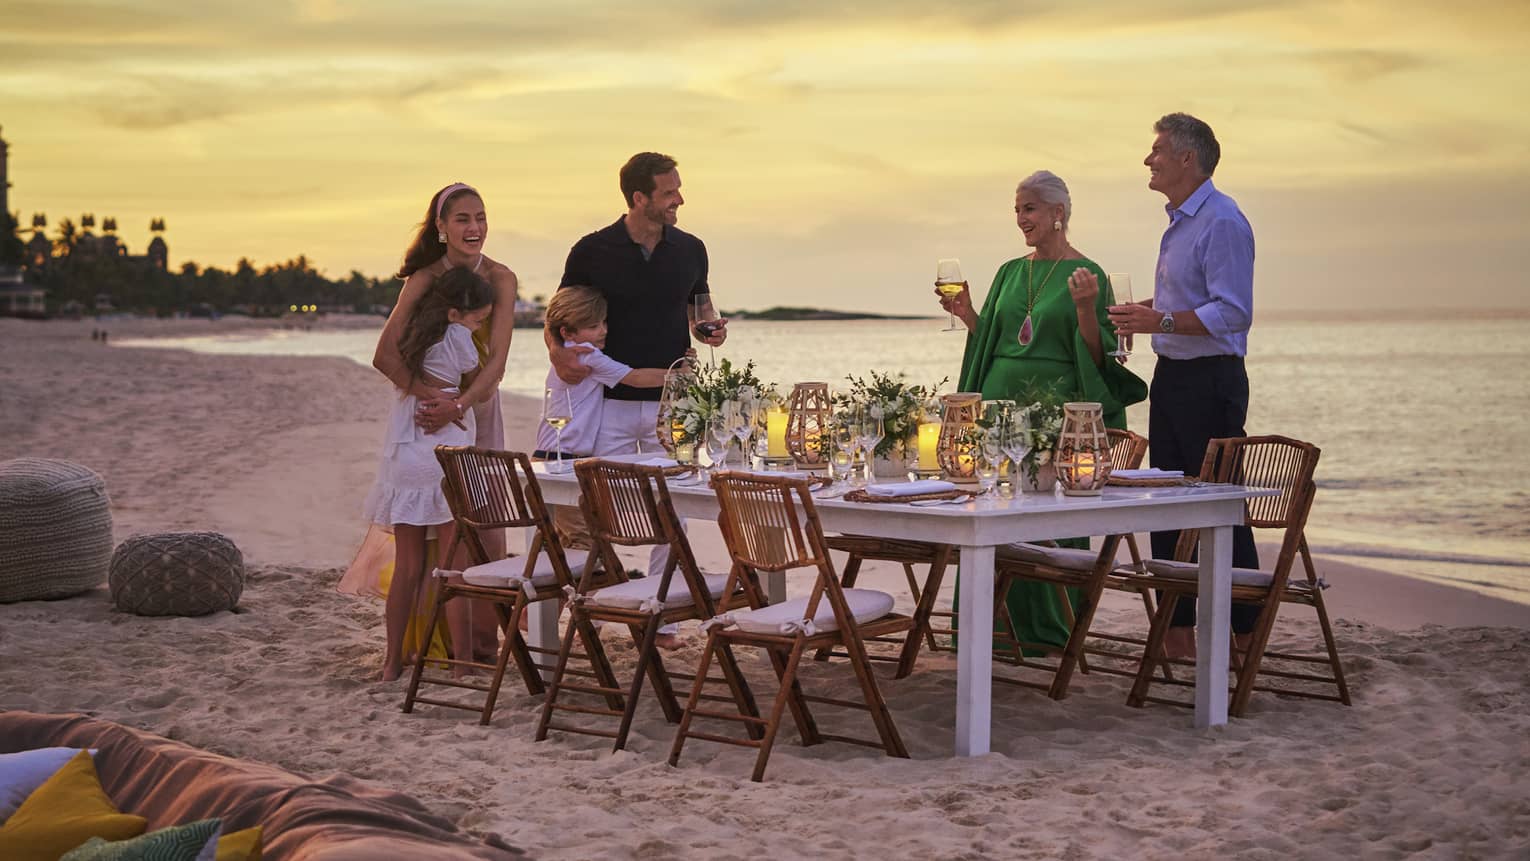 Family standing around dining table on the beach.